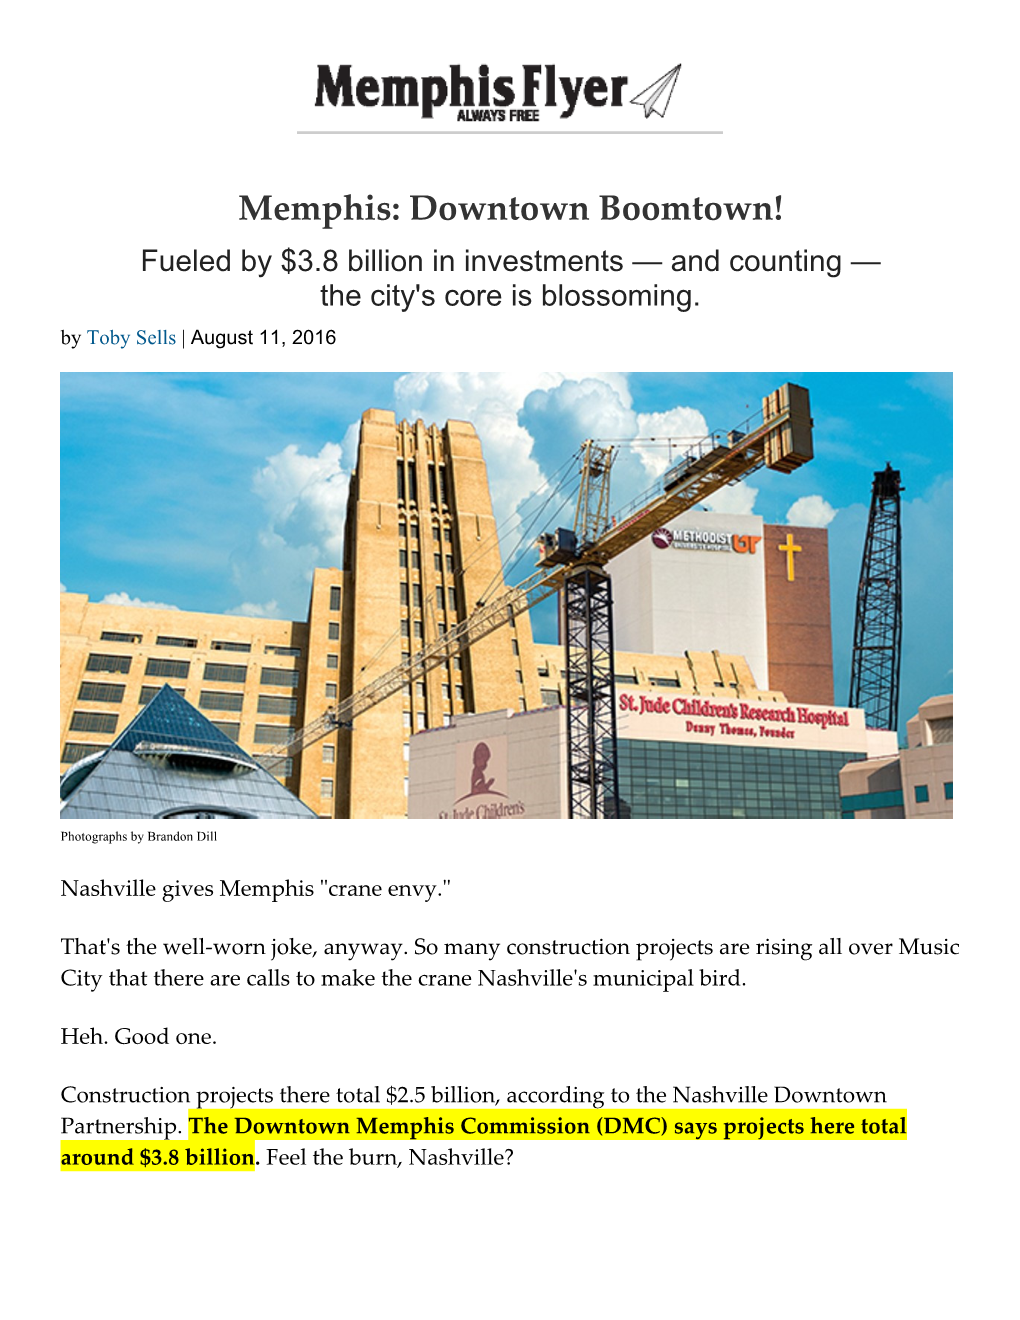 Memphis: Downtown Boomtown! Fueled by $3.8 Billion in Investments — and Counting — the City's Core Is Blossoming